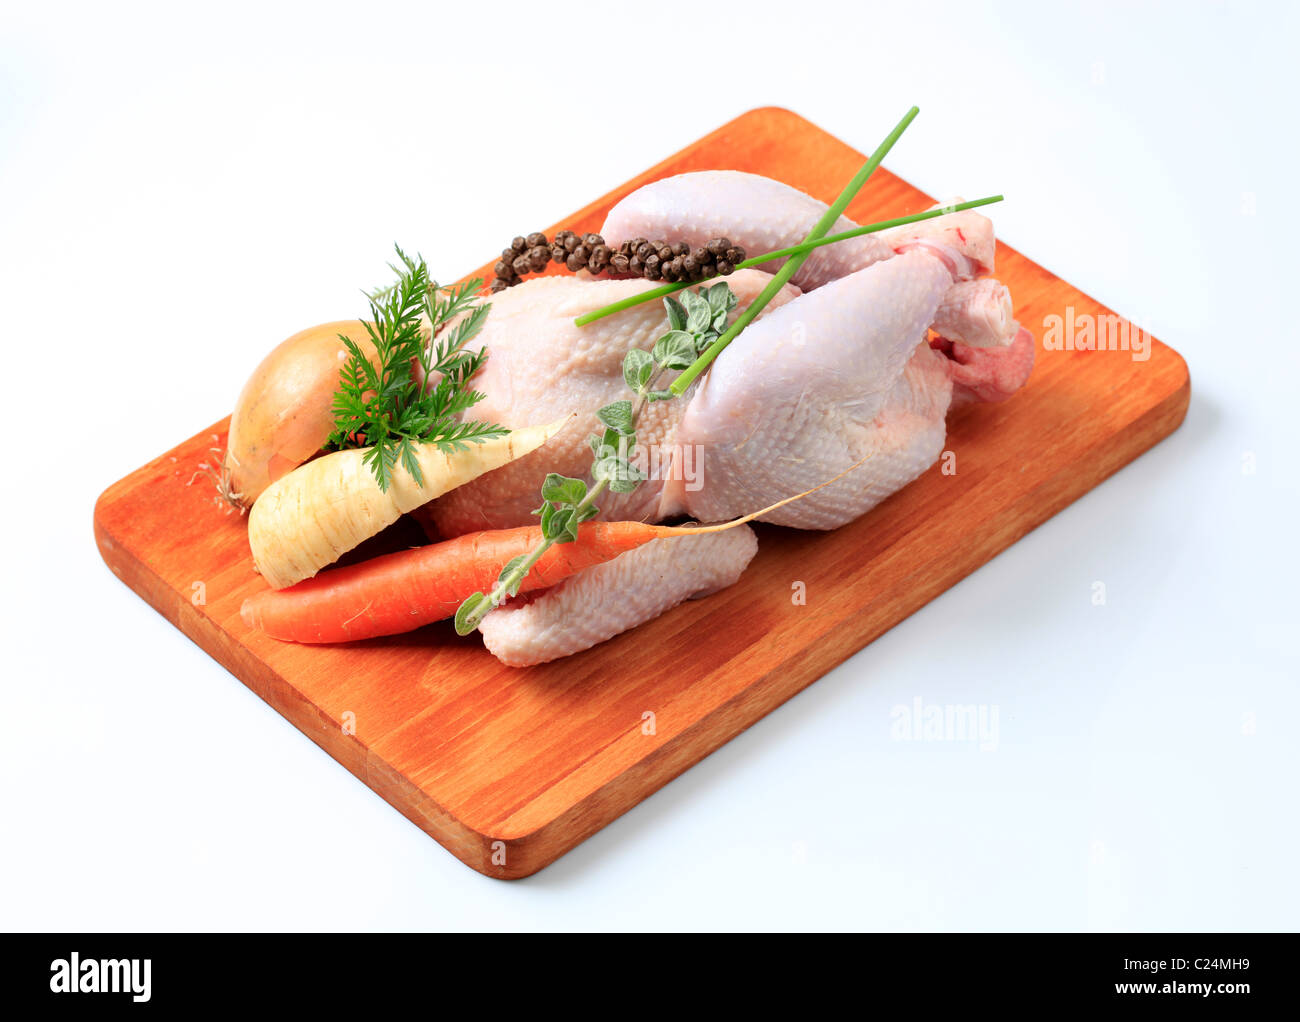 https://c8.alamy.com/comp/C24MH9/raw-chicken-and-vegetables-on-a-cutting-board-C24MH9.jpg